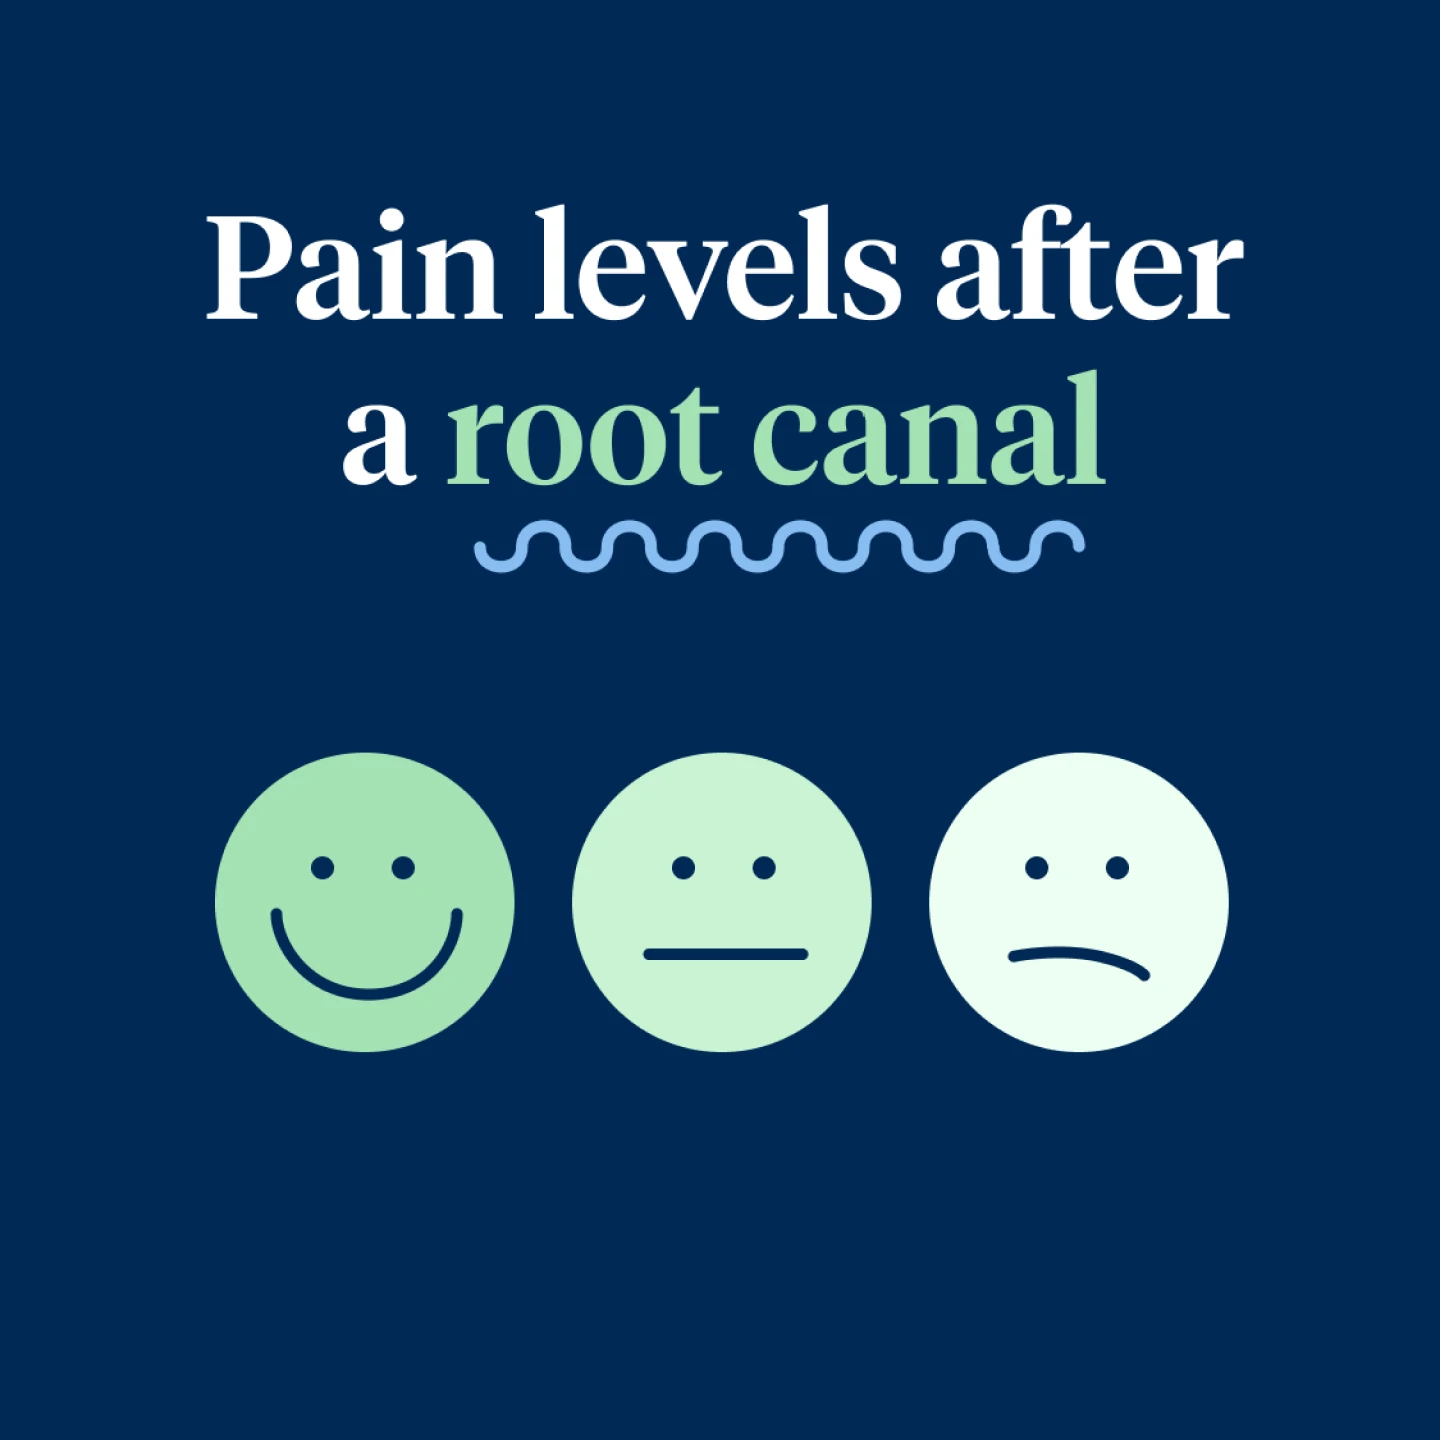 Pain levels after a root canal. 